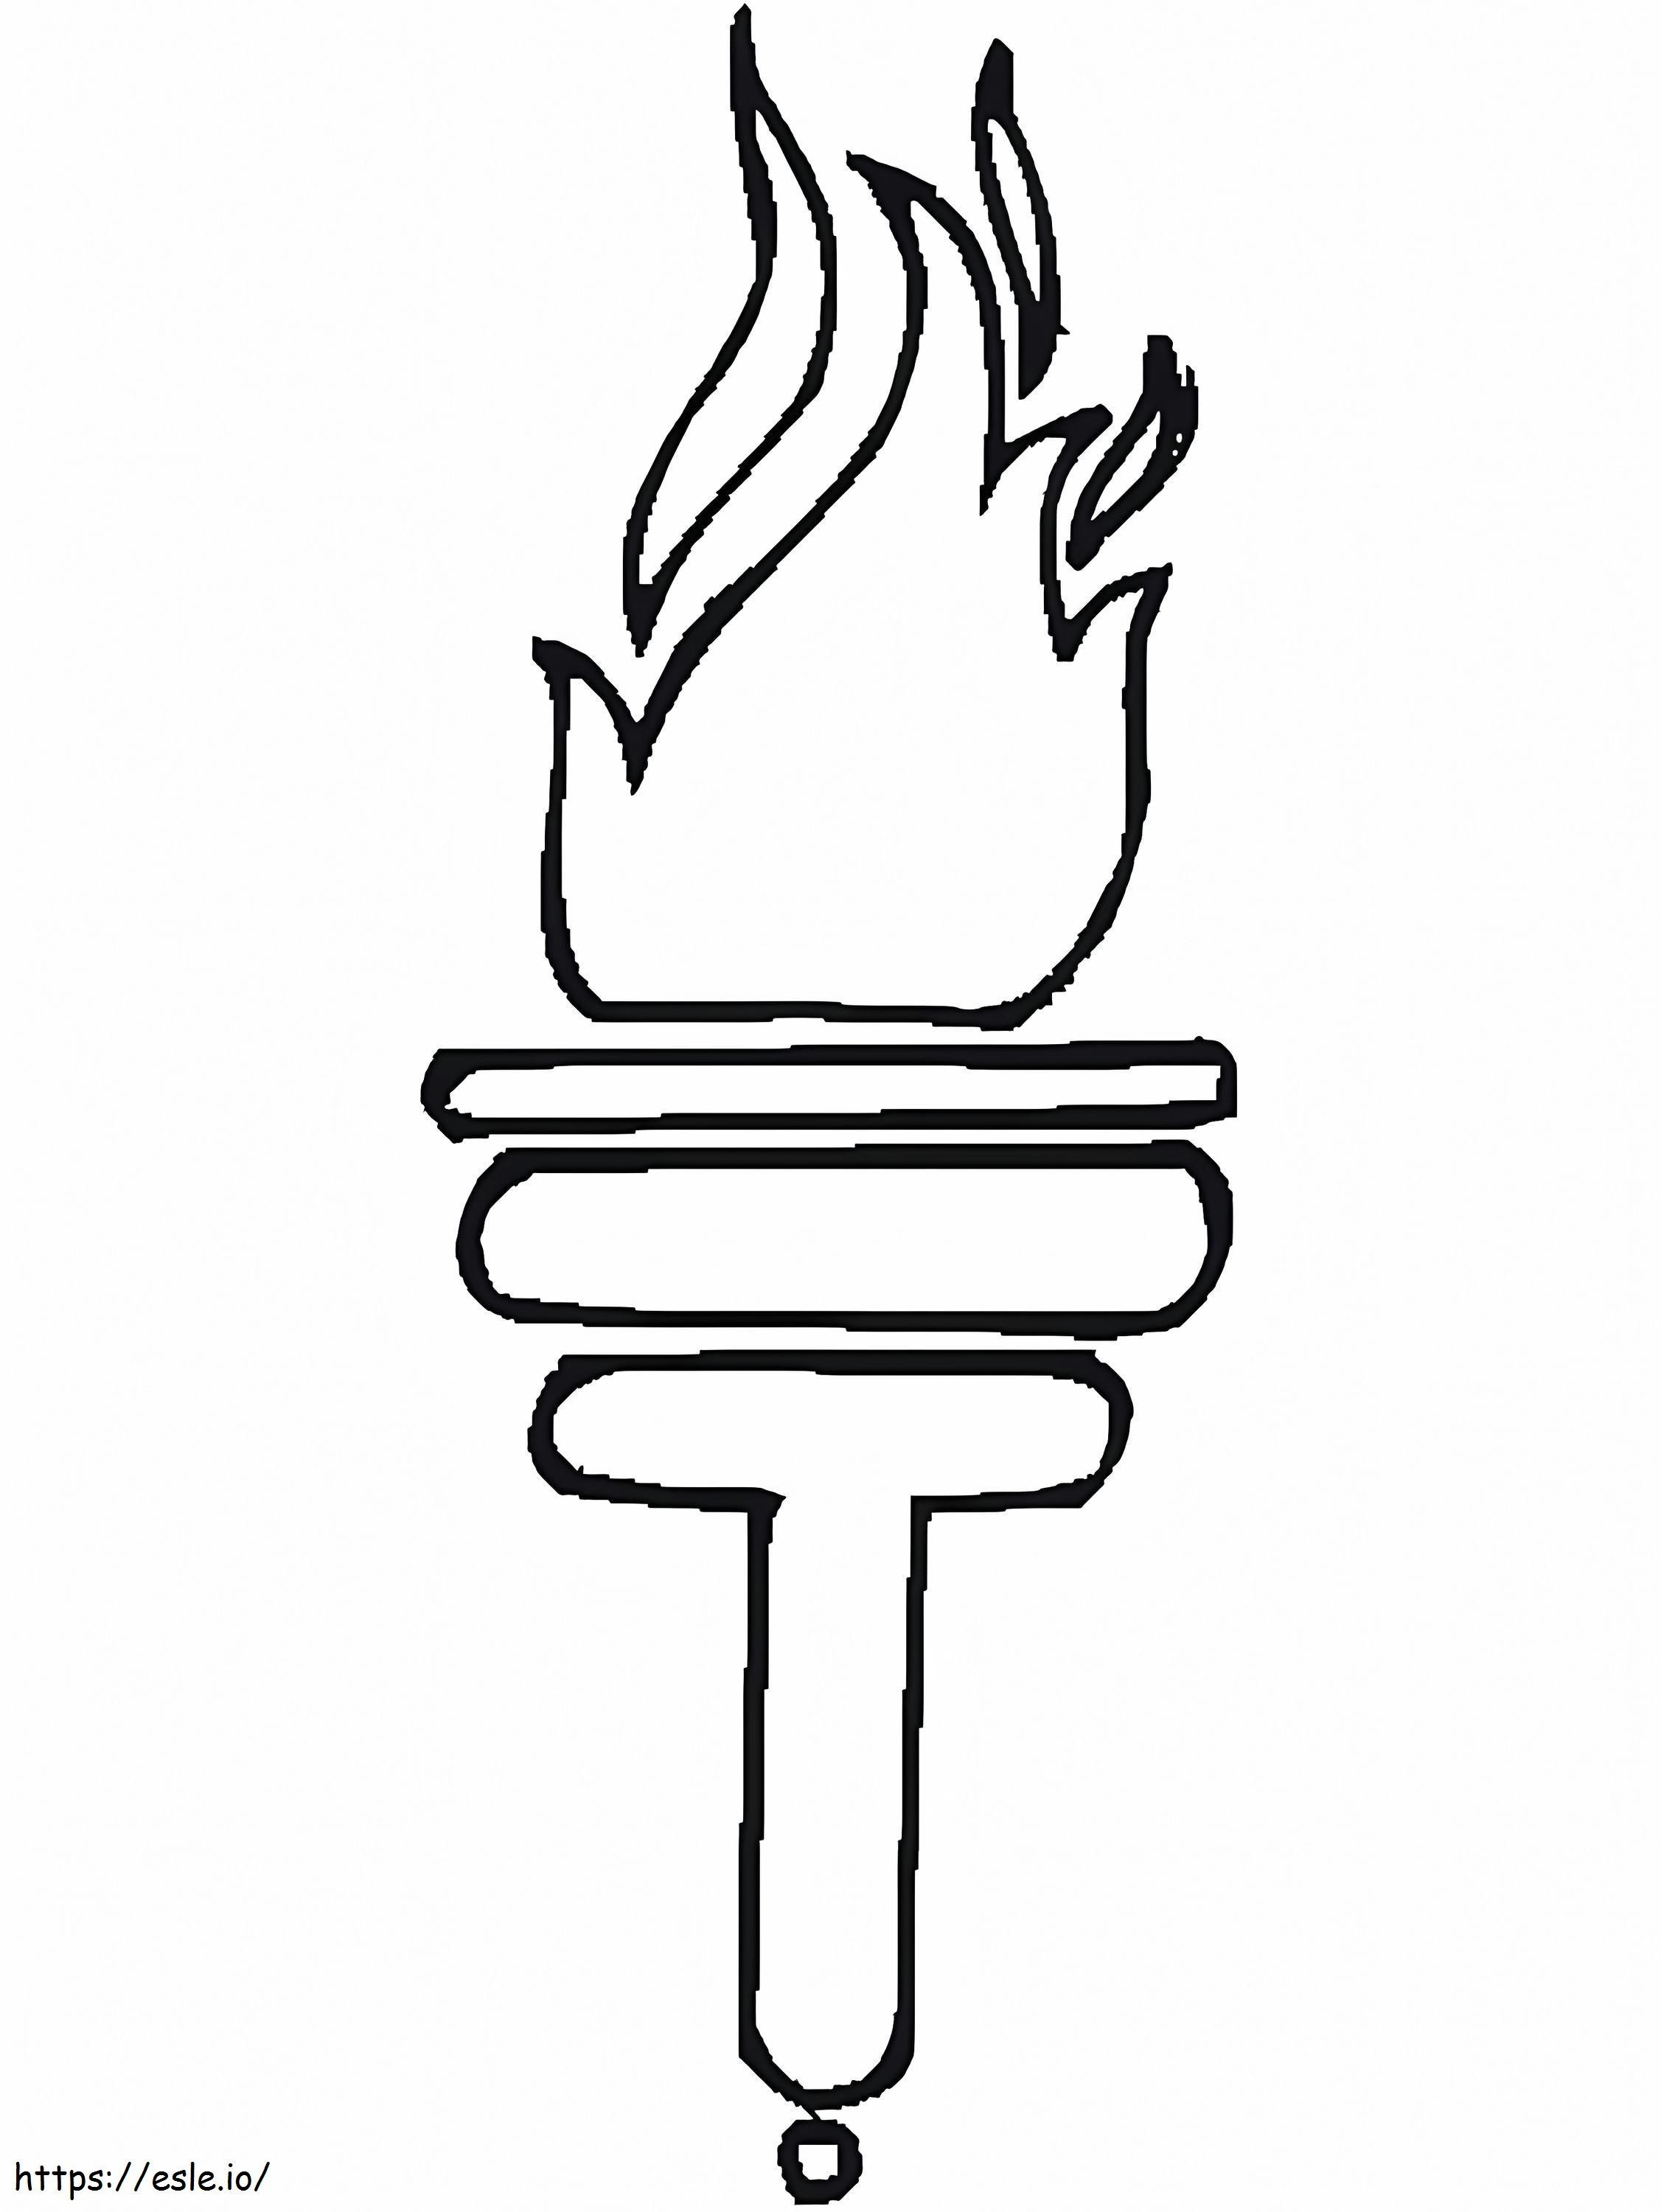 Olympics Torch coloring page